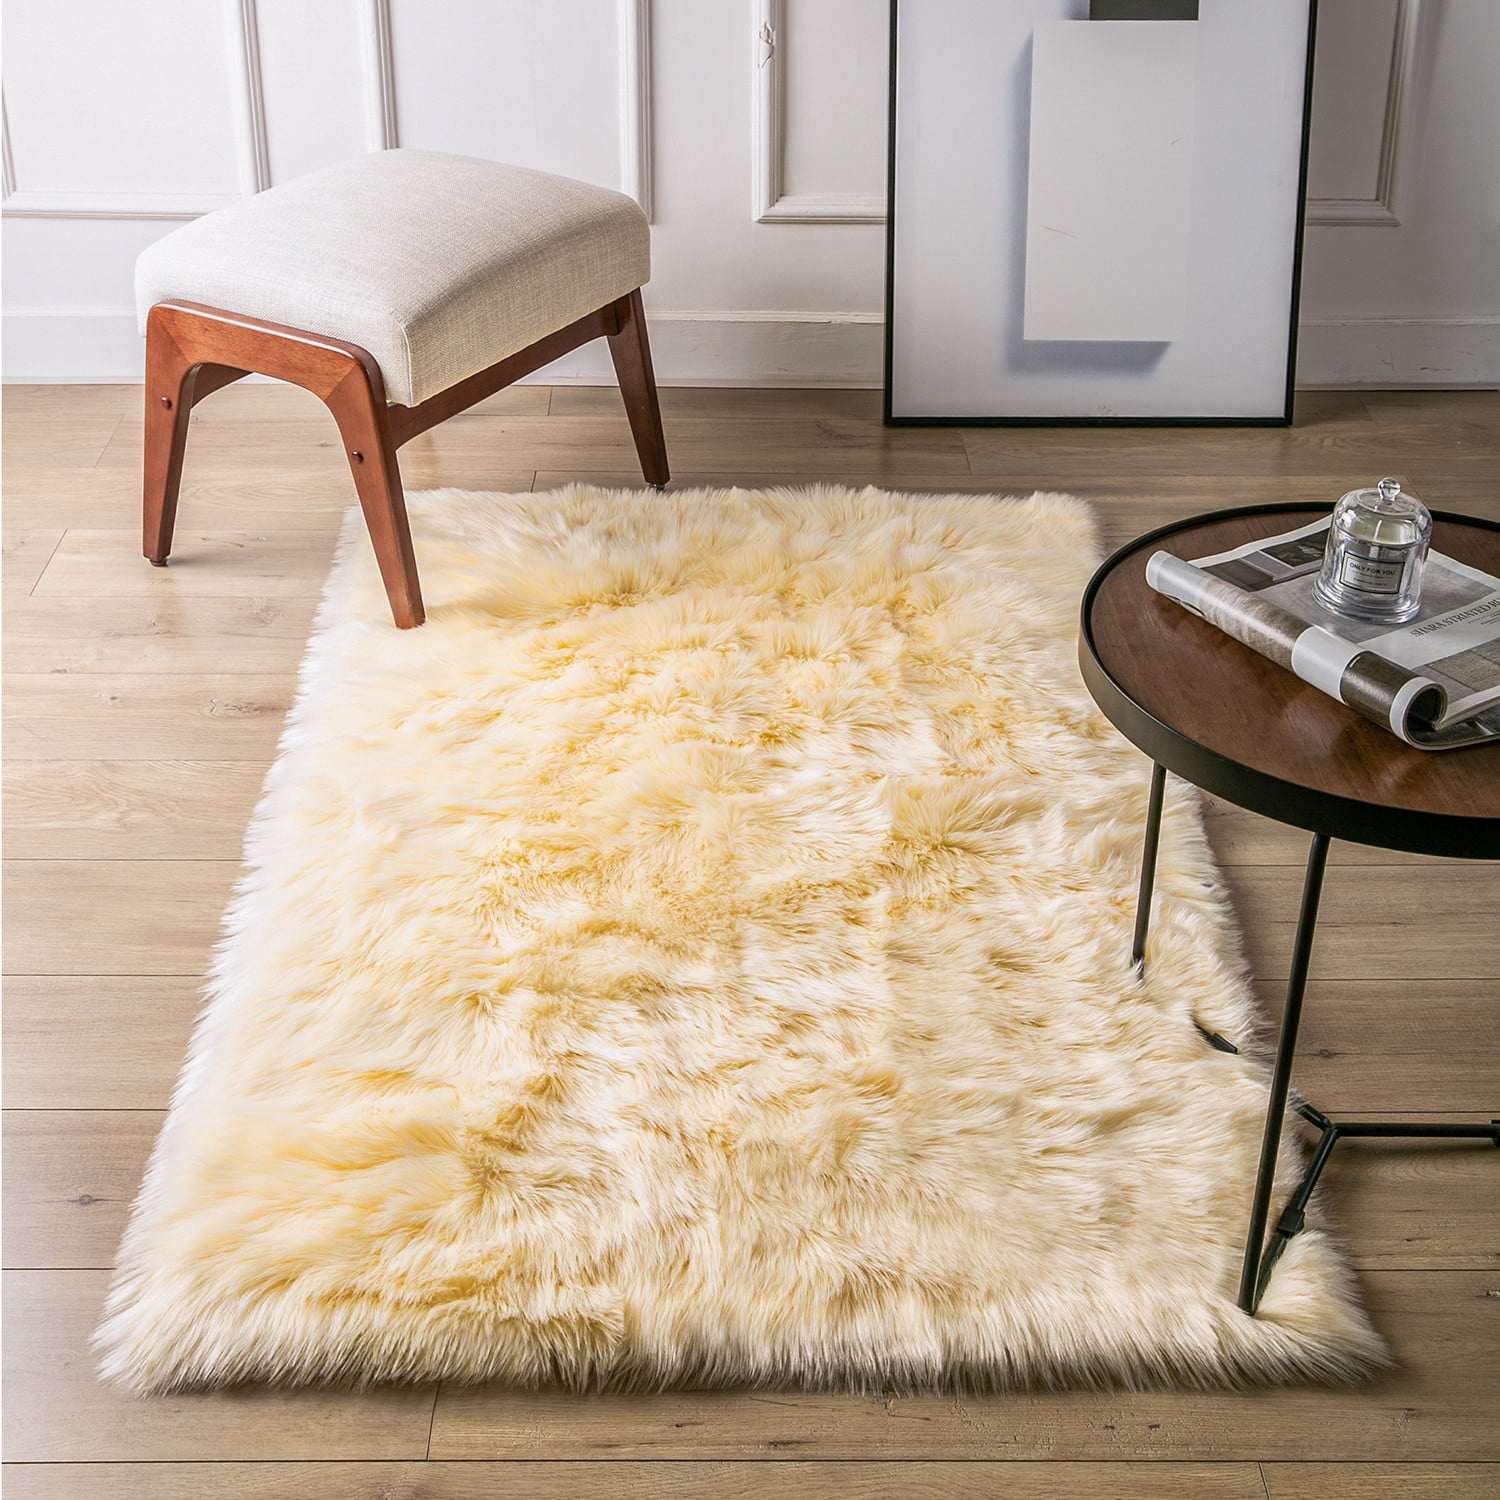 Phantoscope Deluxe Ultra Soft Faux Sheepskin Fur Series Fluffy Decorative Indoor Shag Area Rug, 2 x 3 Feet Rectangle, Navy and White, 1 Pack, Size: 2' x 3' Rec